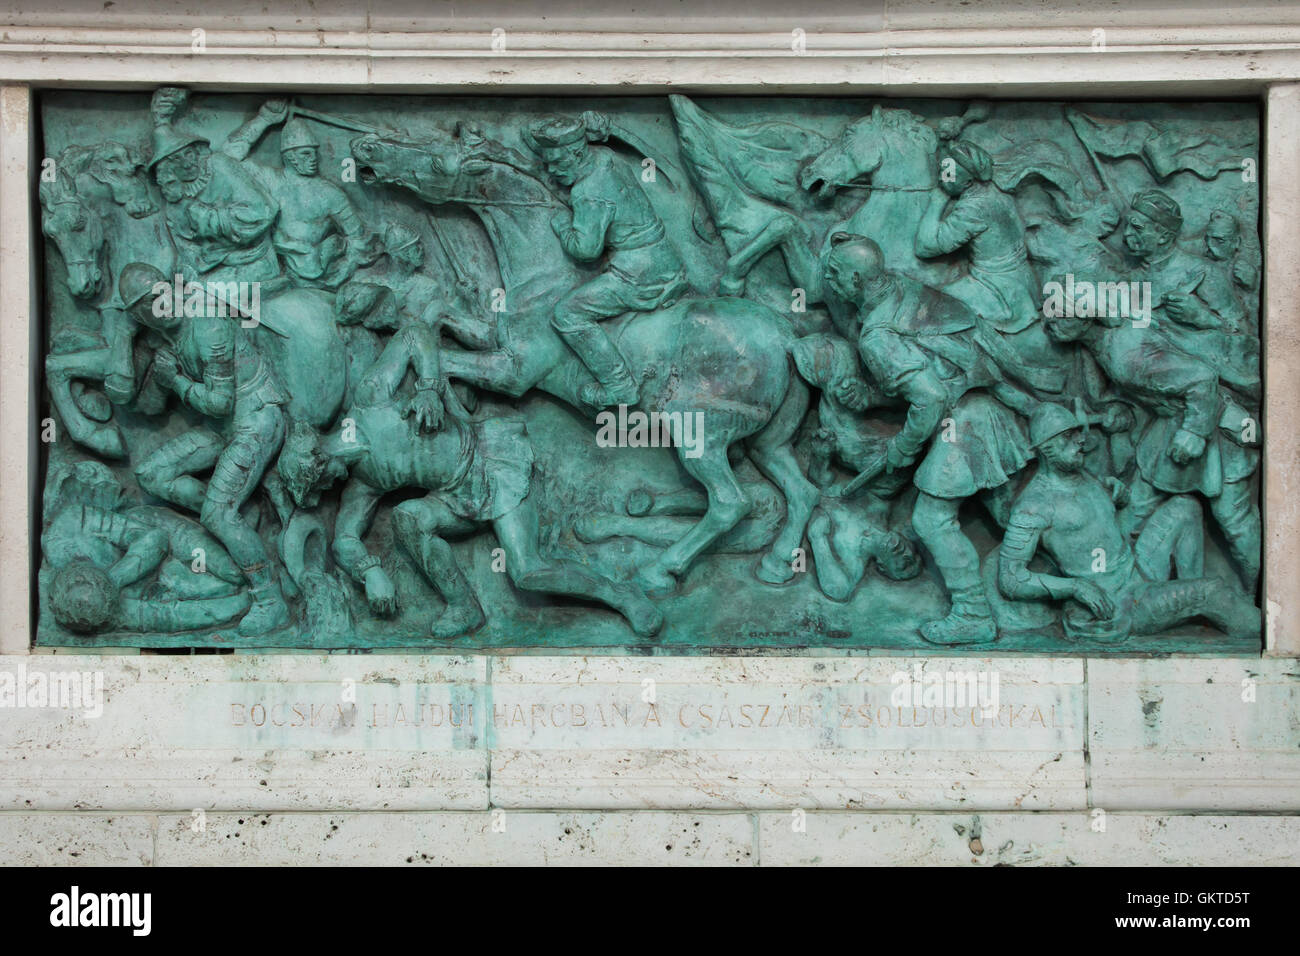 Hajduks leading by Istvan Bocskai defeat the Habsburg imperial army at the Battle at Almosd and Bihardioszeg on 15 October 1604. Bronze relief by Hungarian sculptor Laszlo Marton on the Millennium Monument in the Heroes Square in Budapest, Hungary. Stock Photo